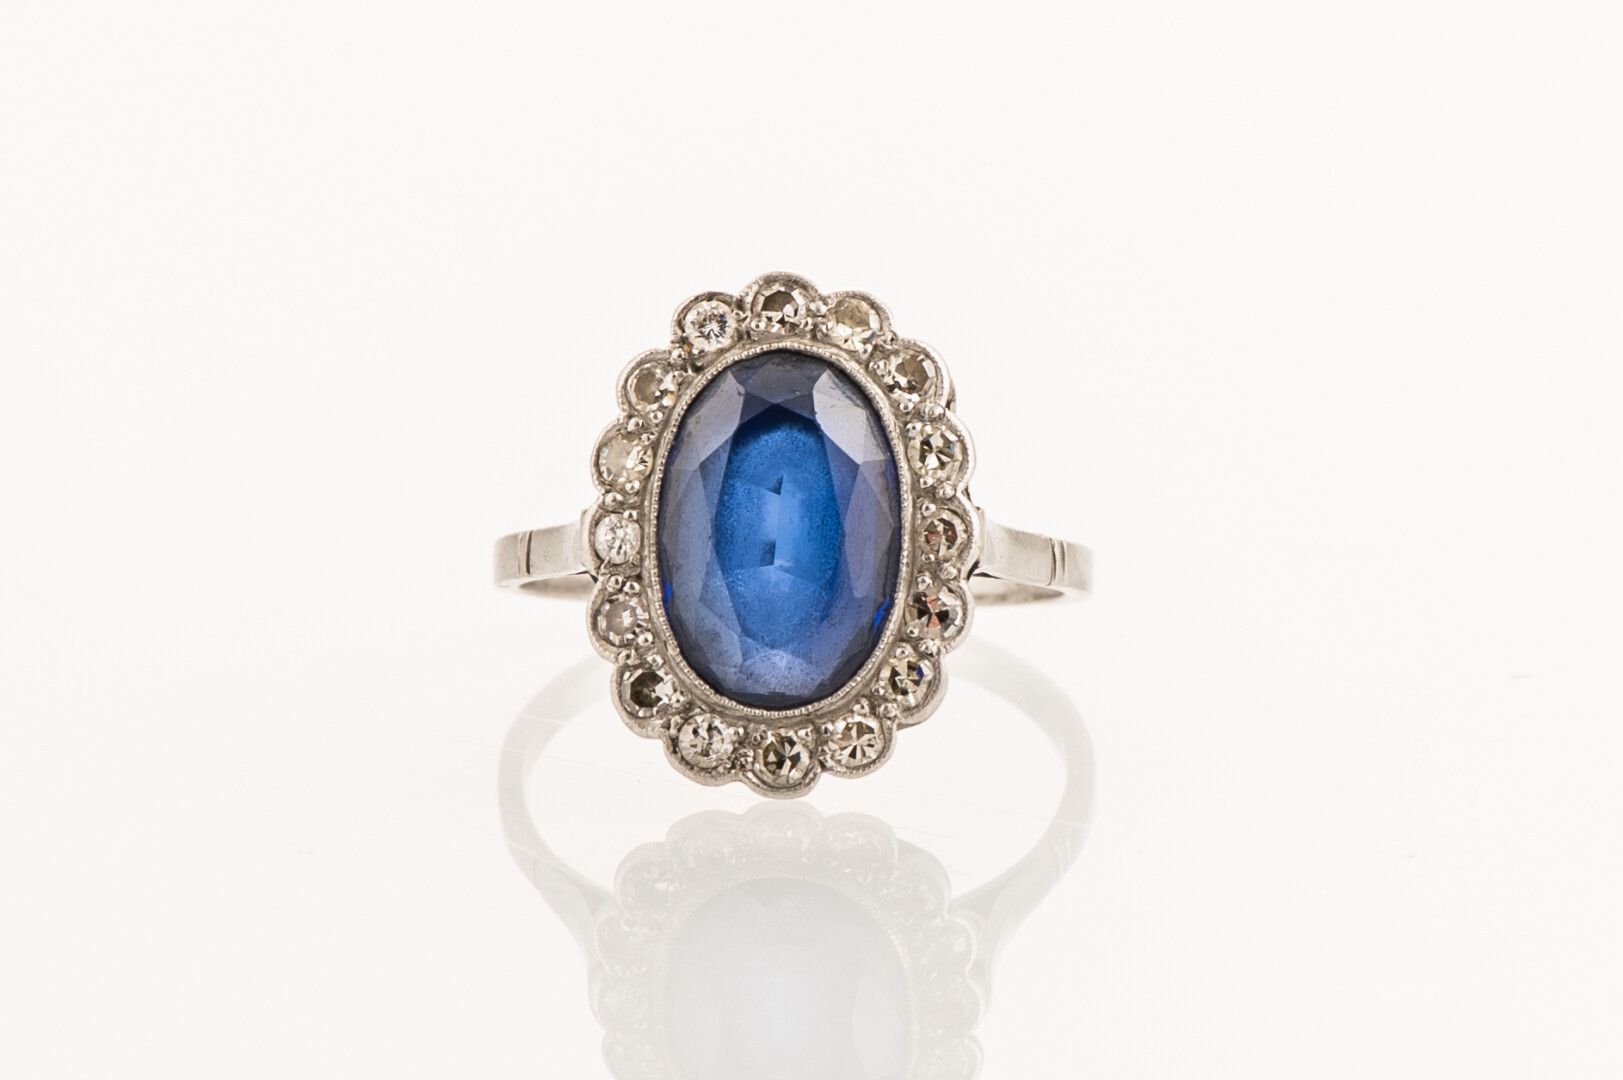 Null Ring in white gold 750 thousandths, decorated with a blue stone in a circle&hellip;